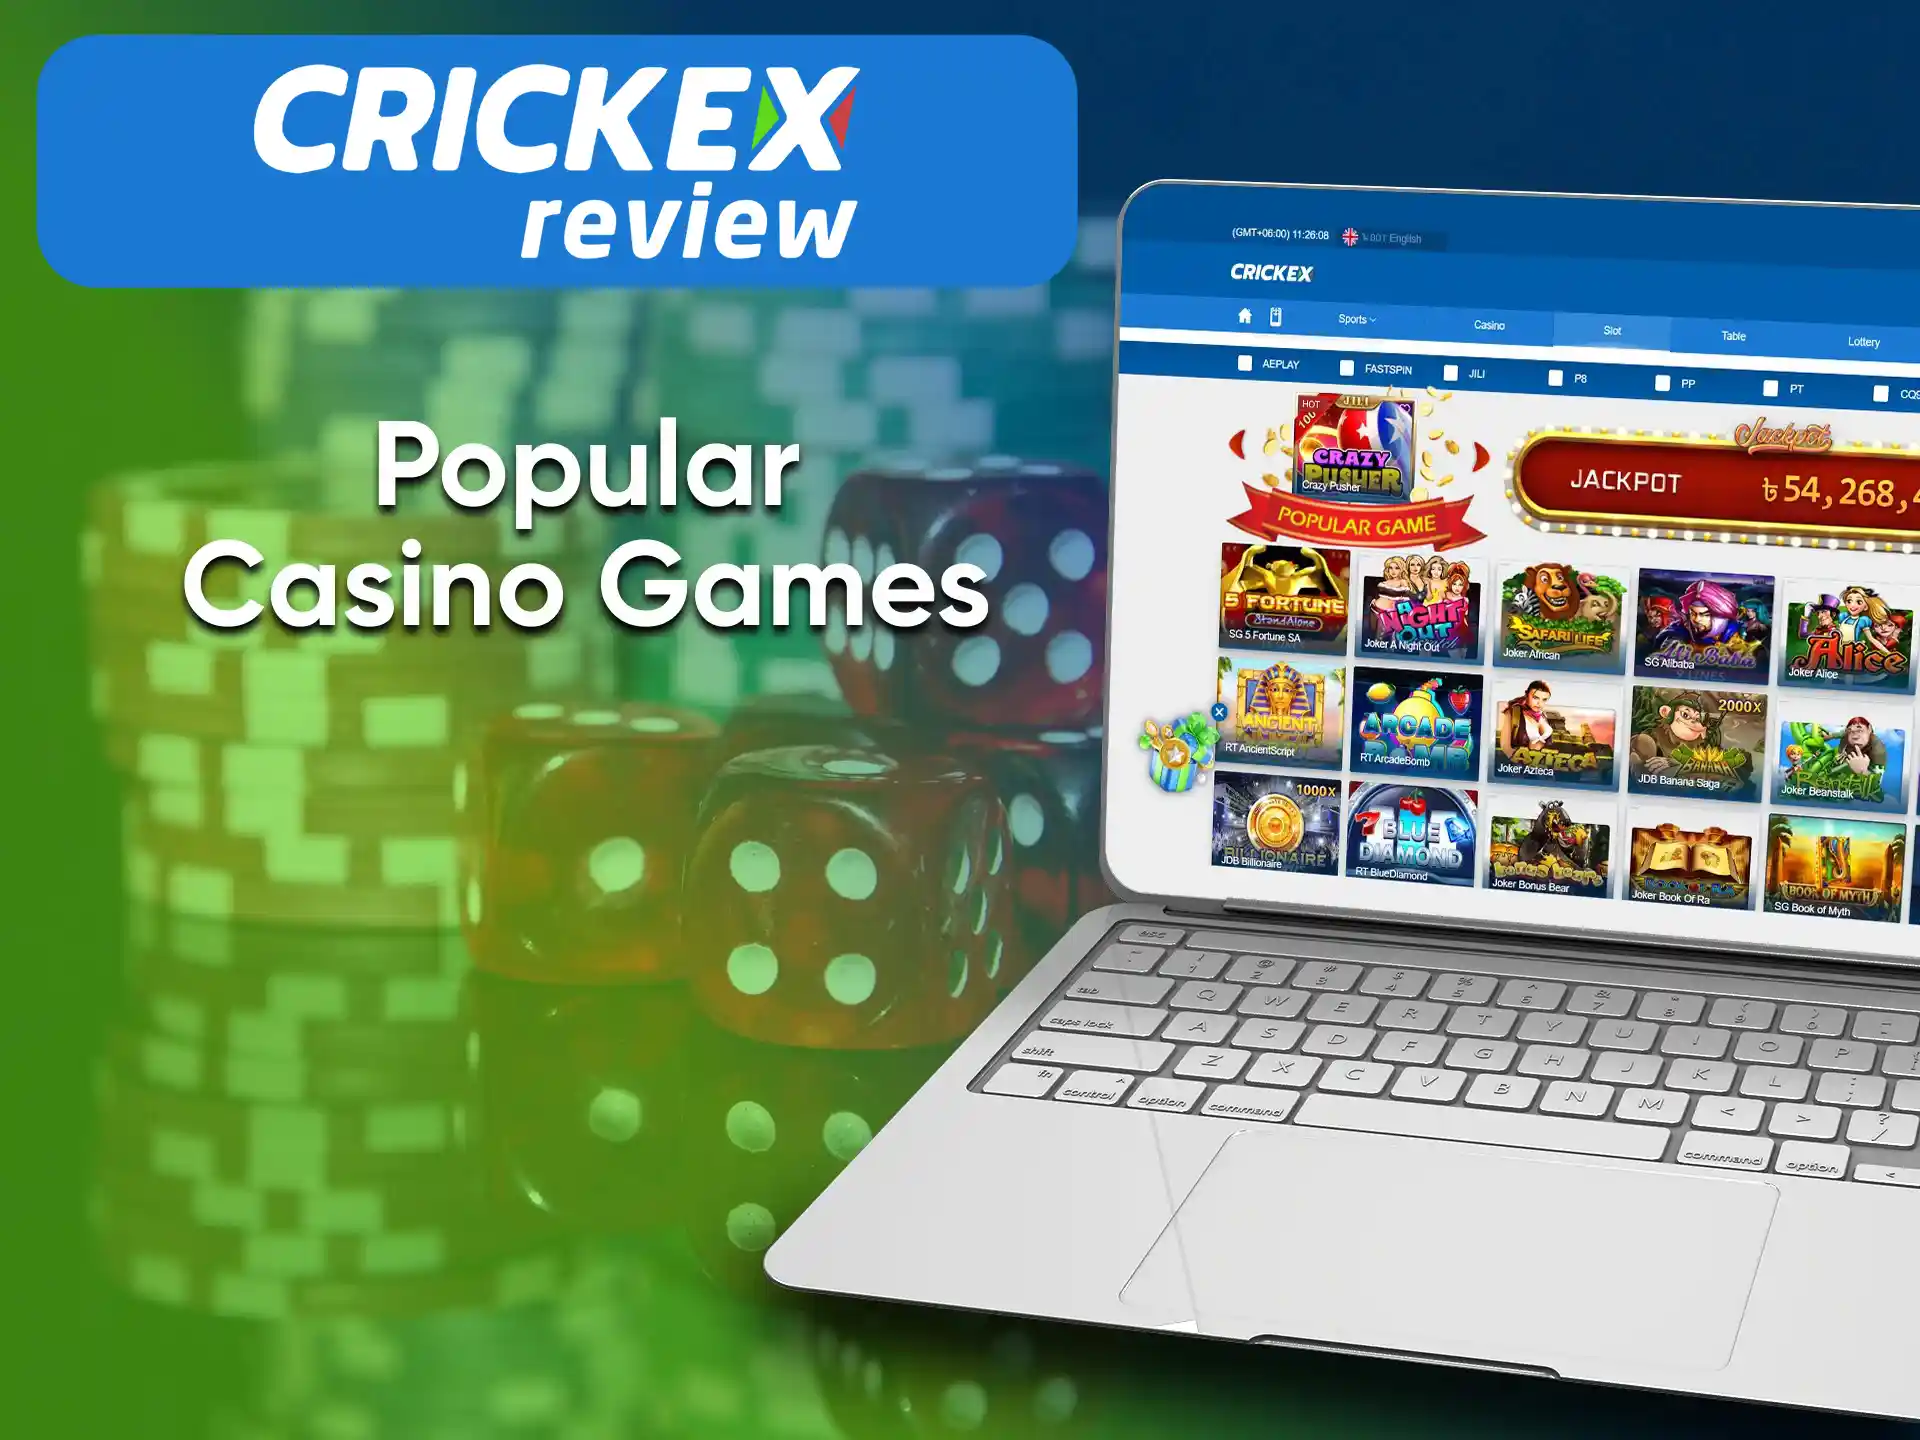 Crickex casino has a section with the most polar games.